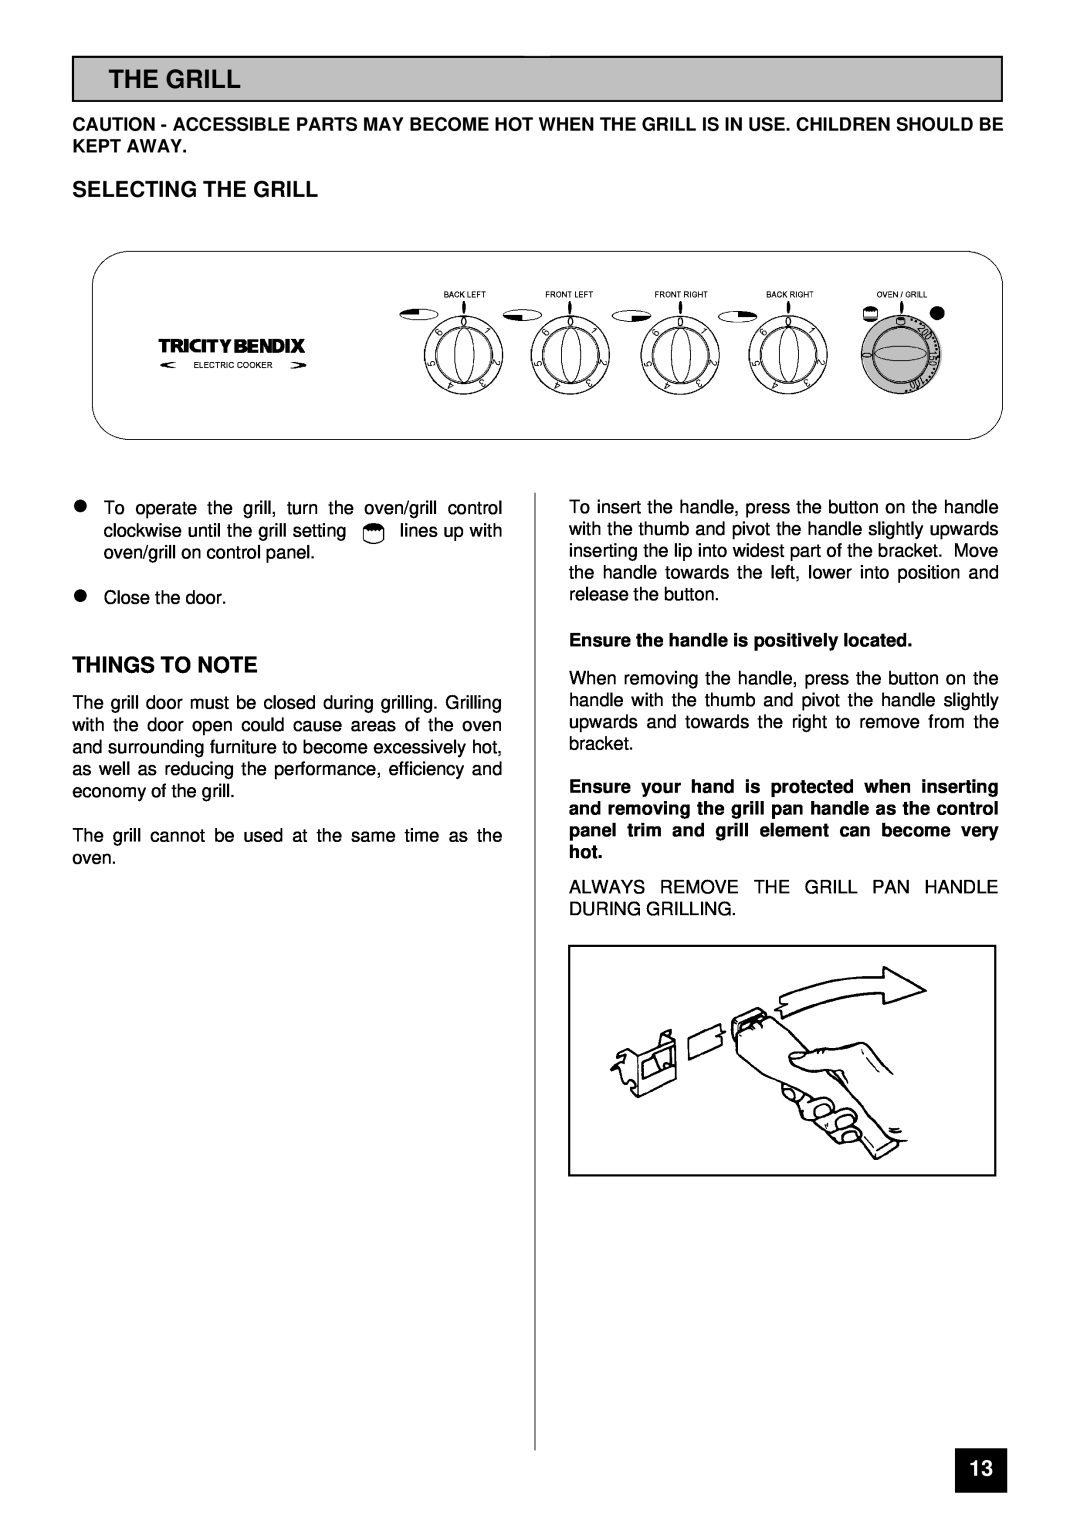 Tricity Bendix RSE50M installation instructions Selecting The Grill, Things To Note 